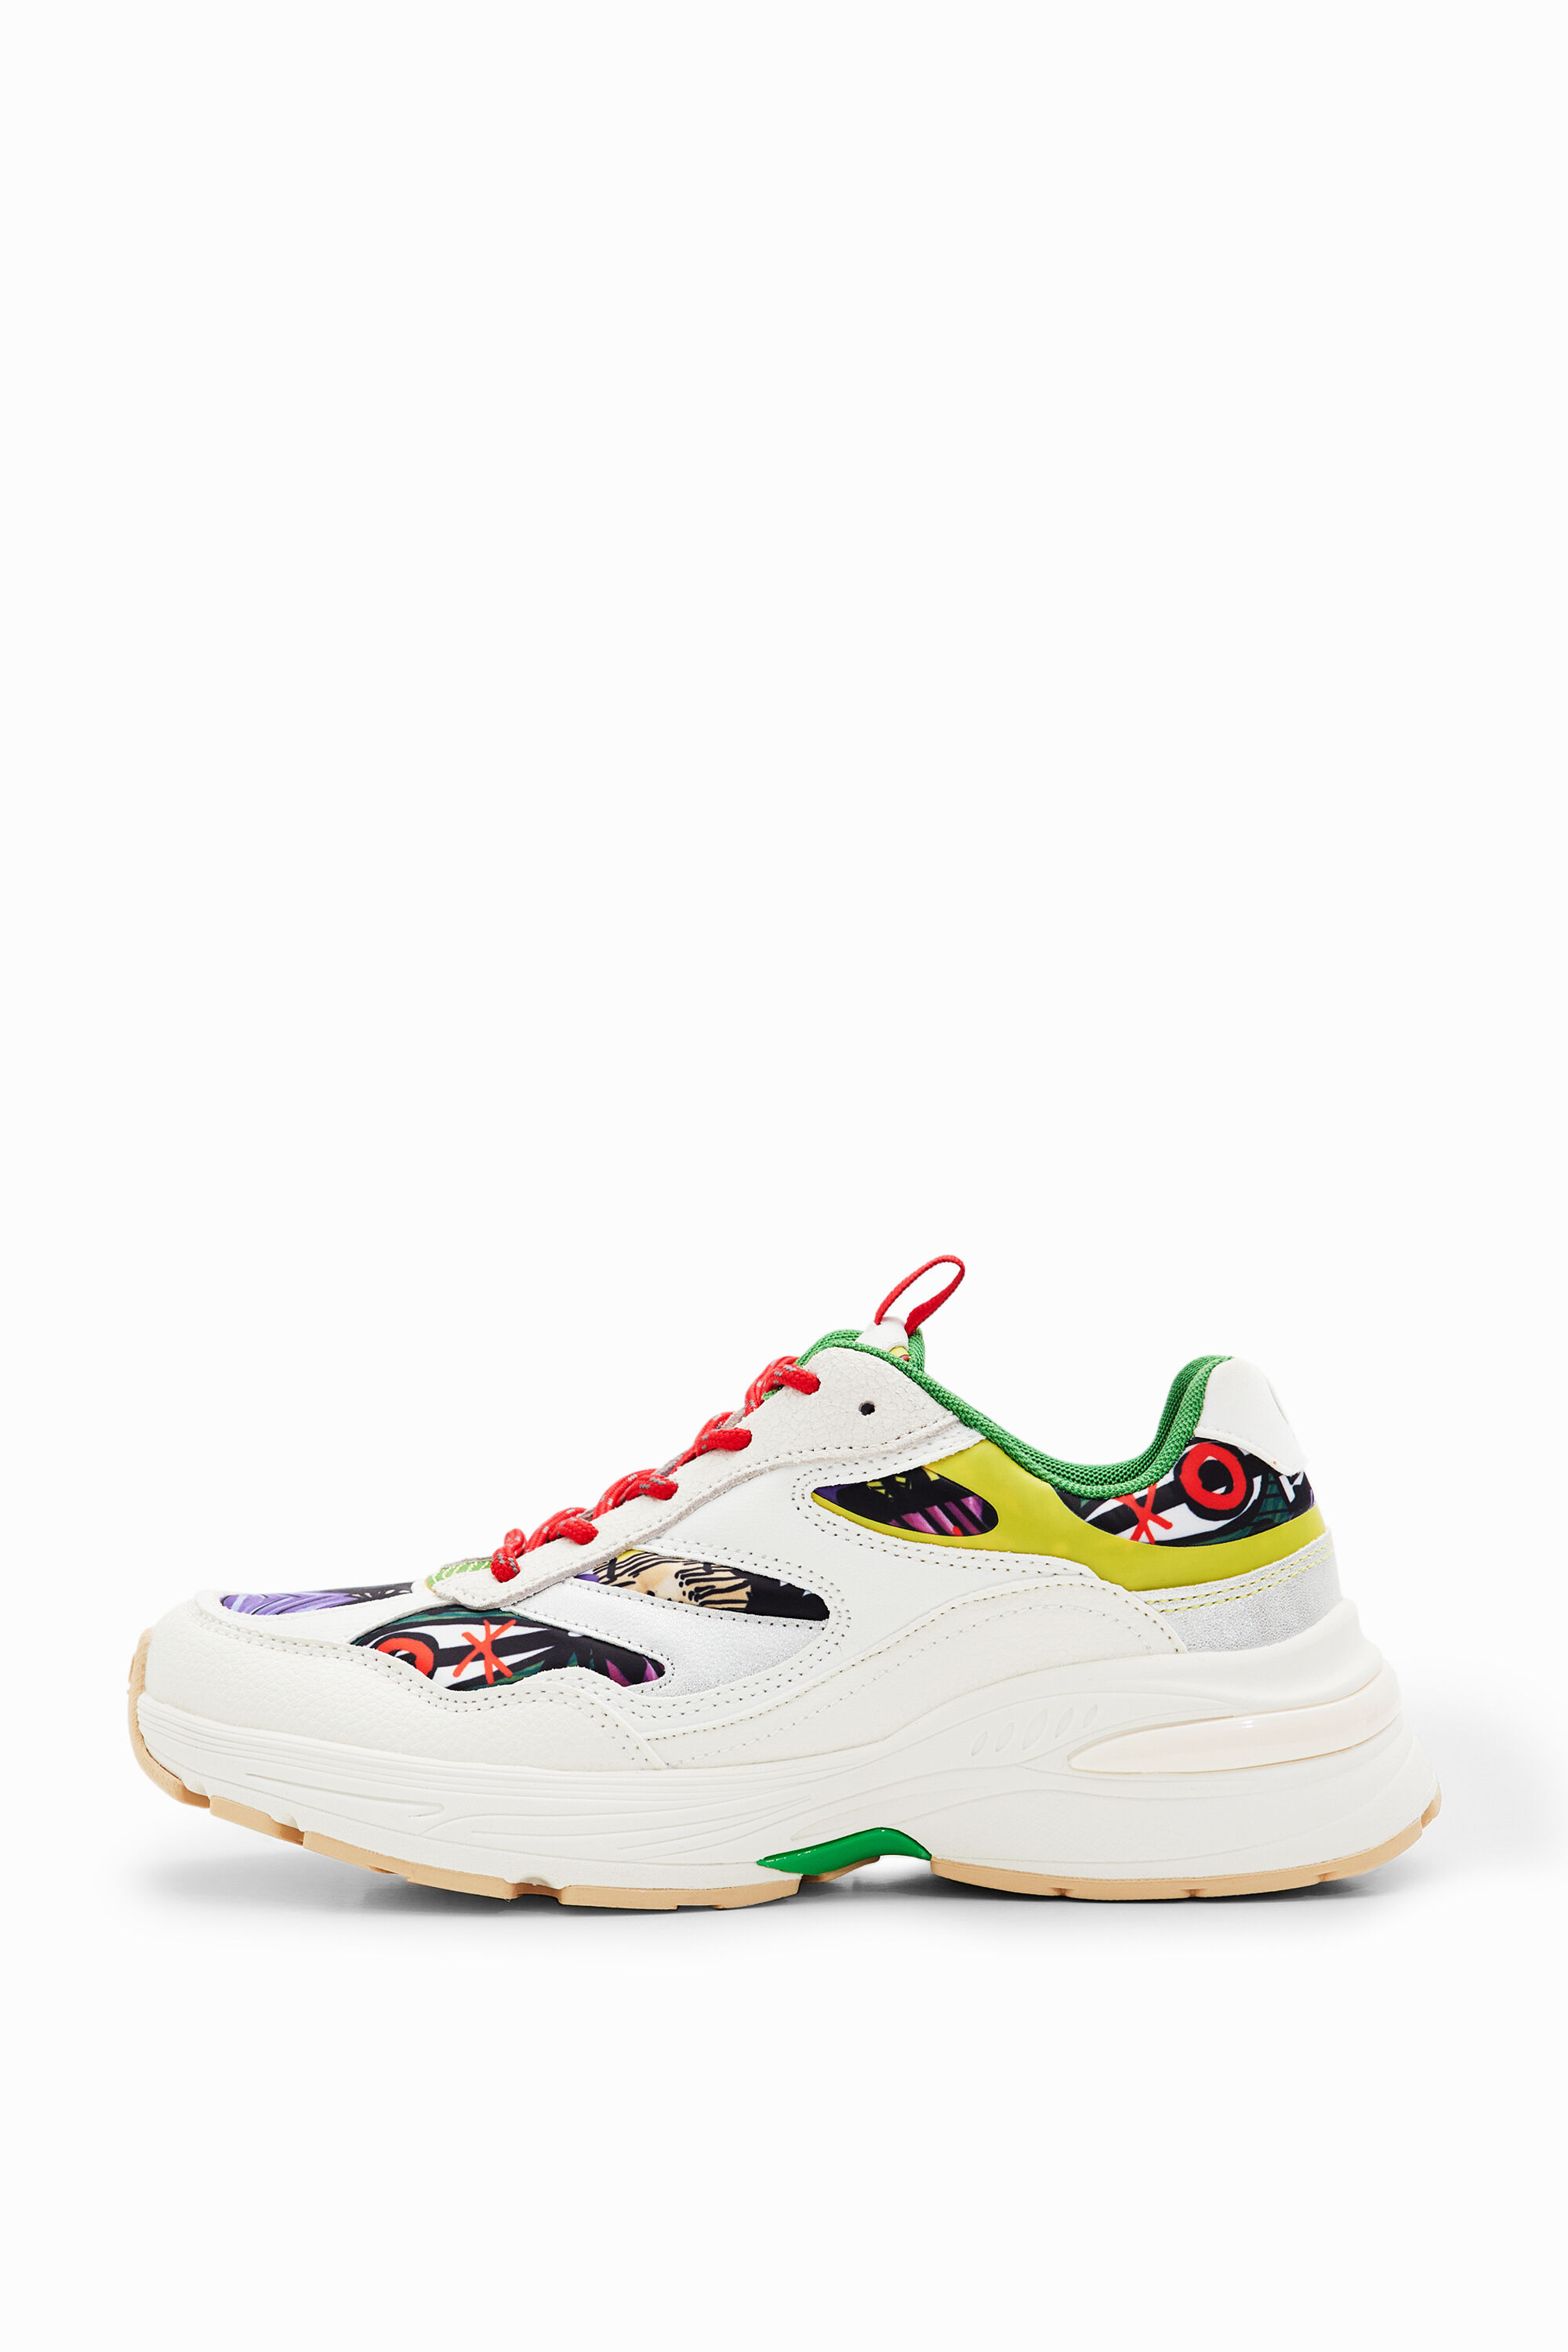 Desigual M. Christian Lacroix Running Sneakers In Material Finishes